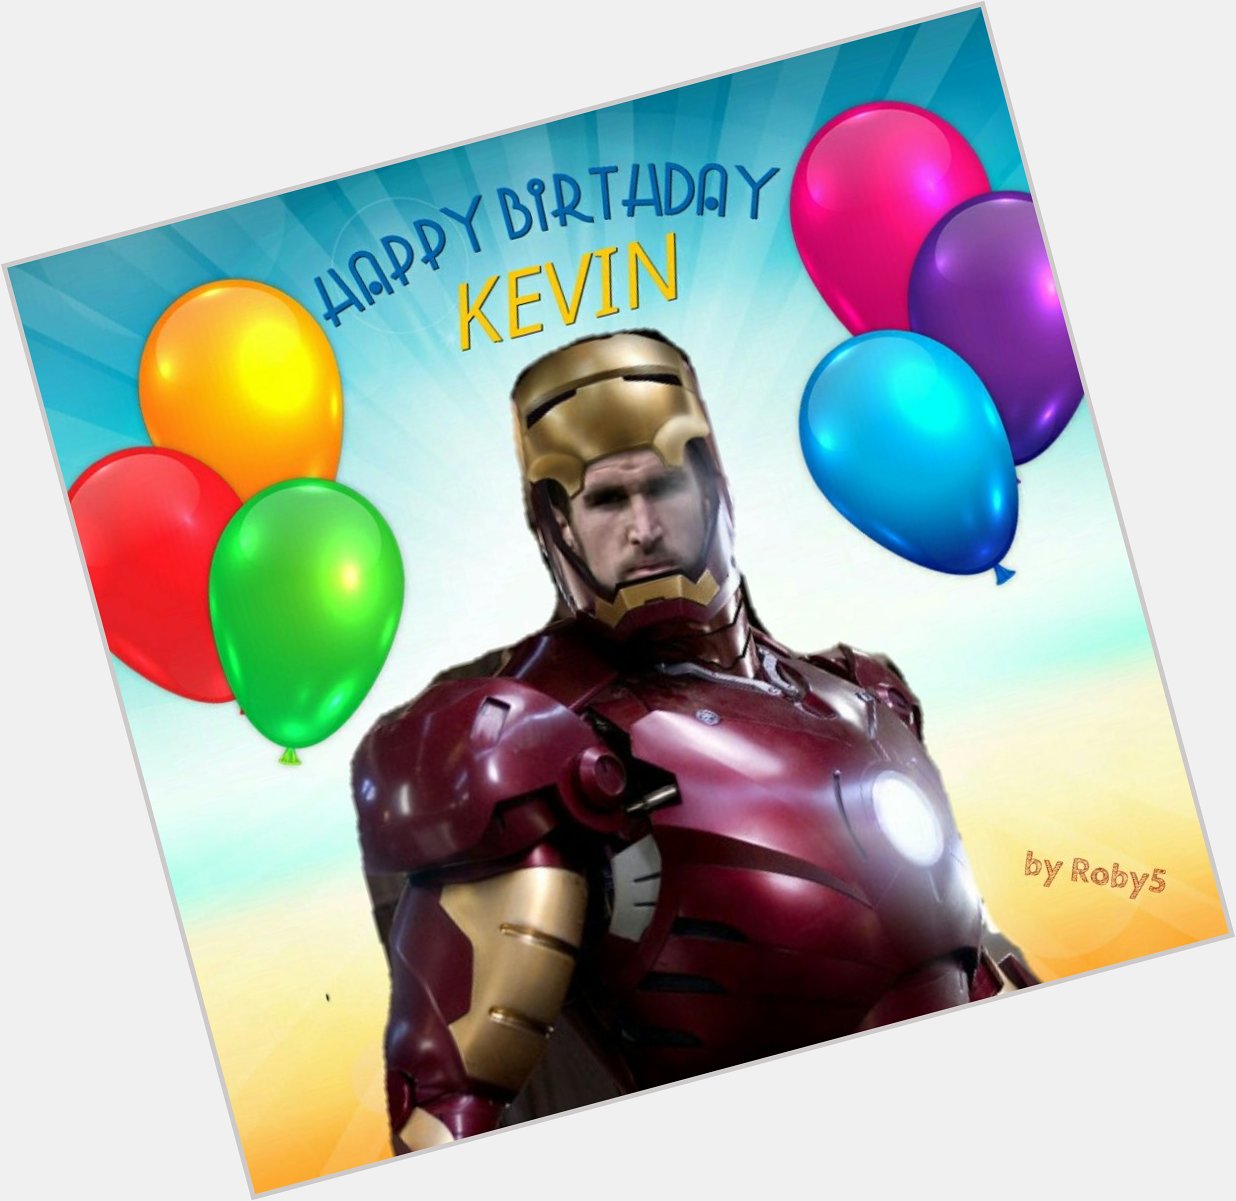  Happy Birthday Kevin  by Roby5 